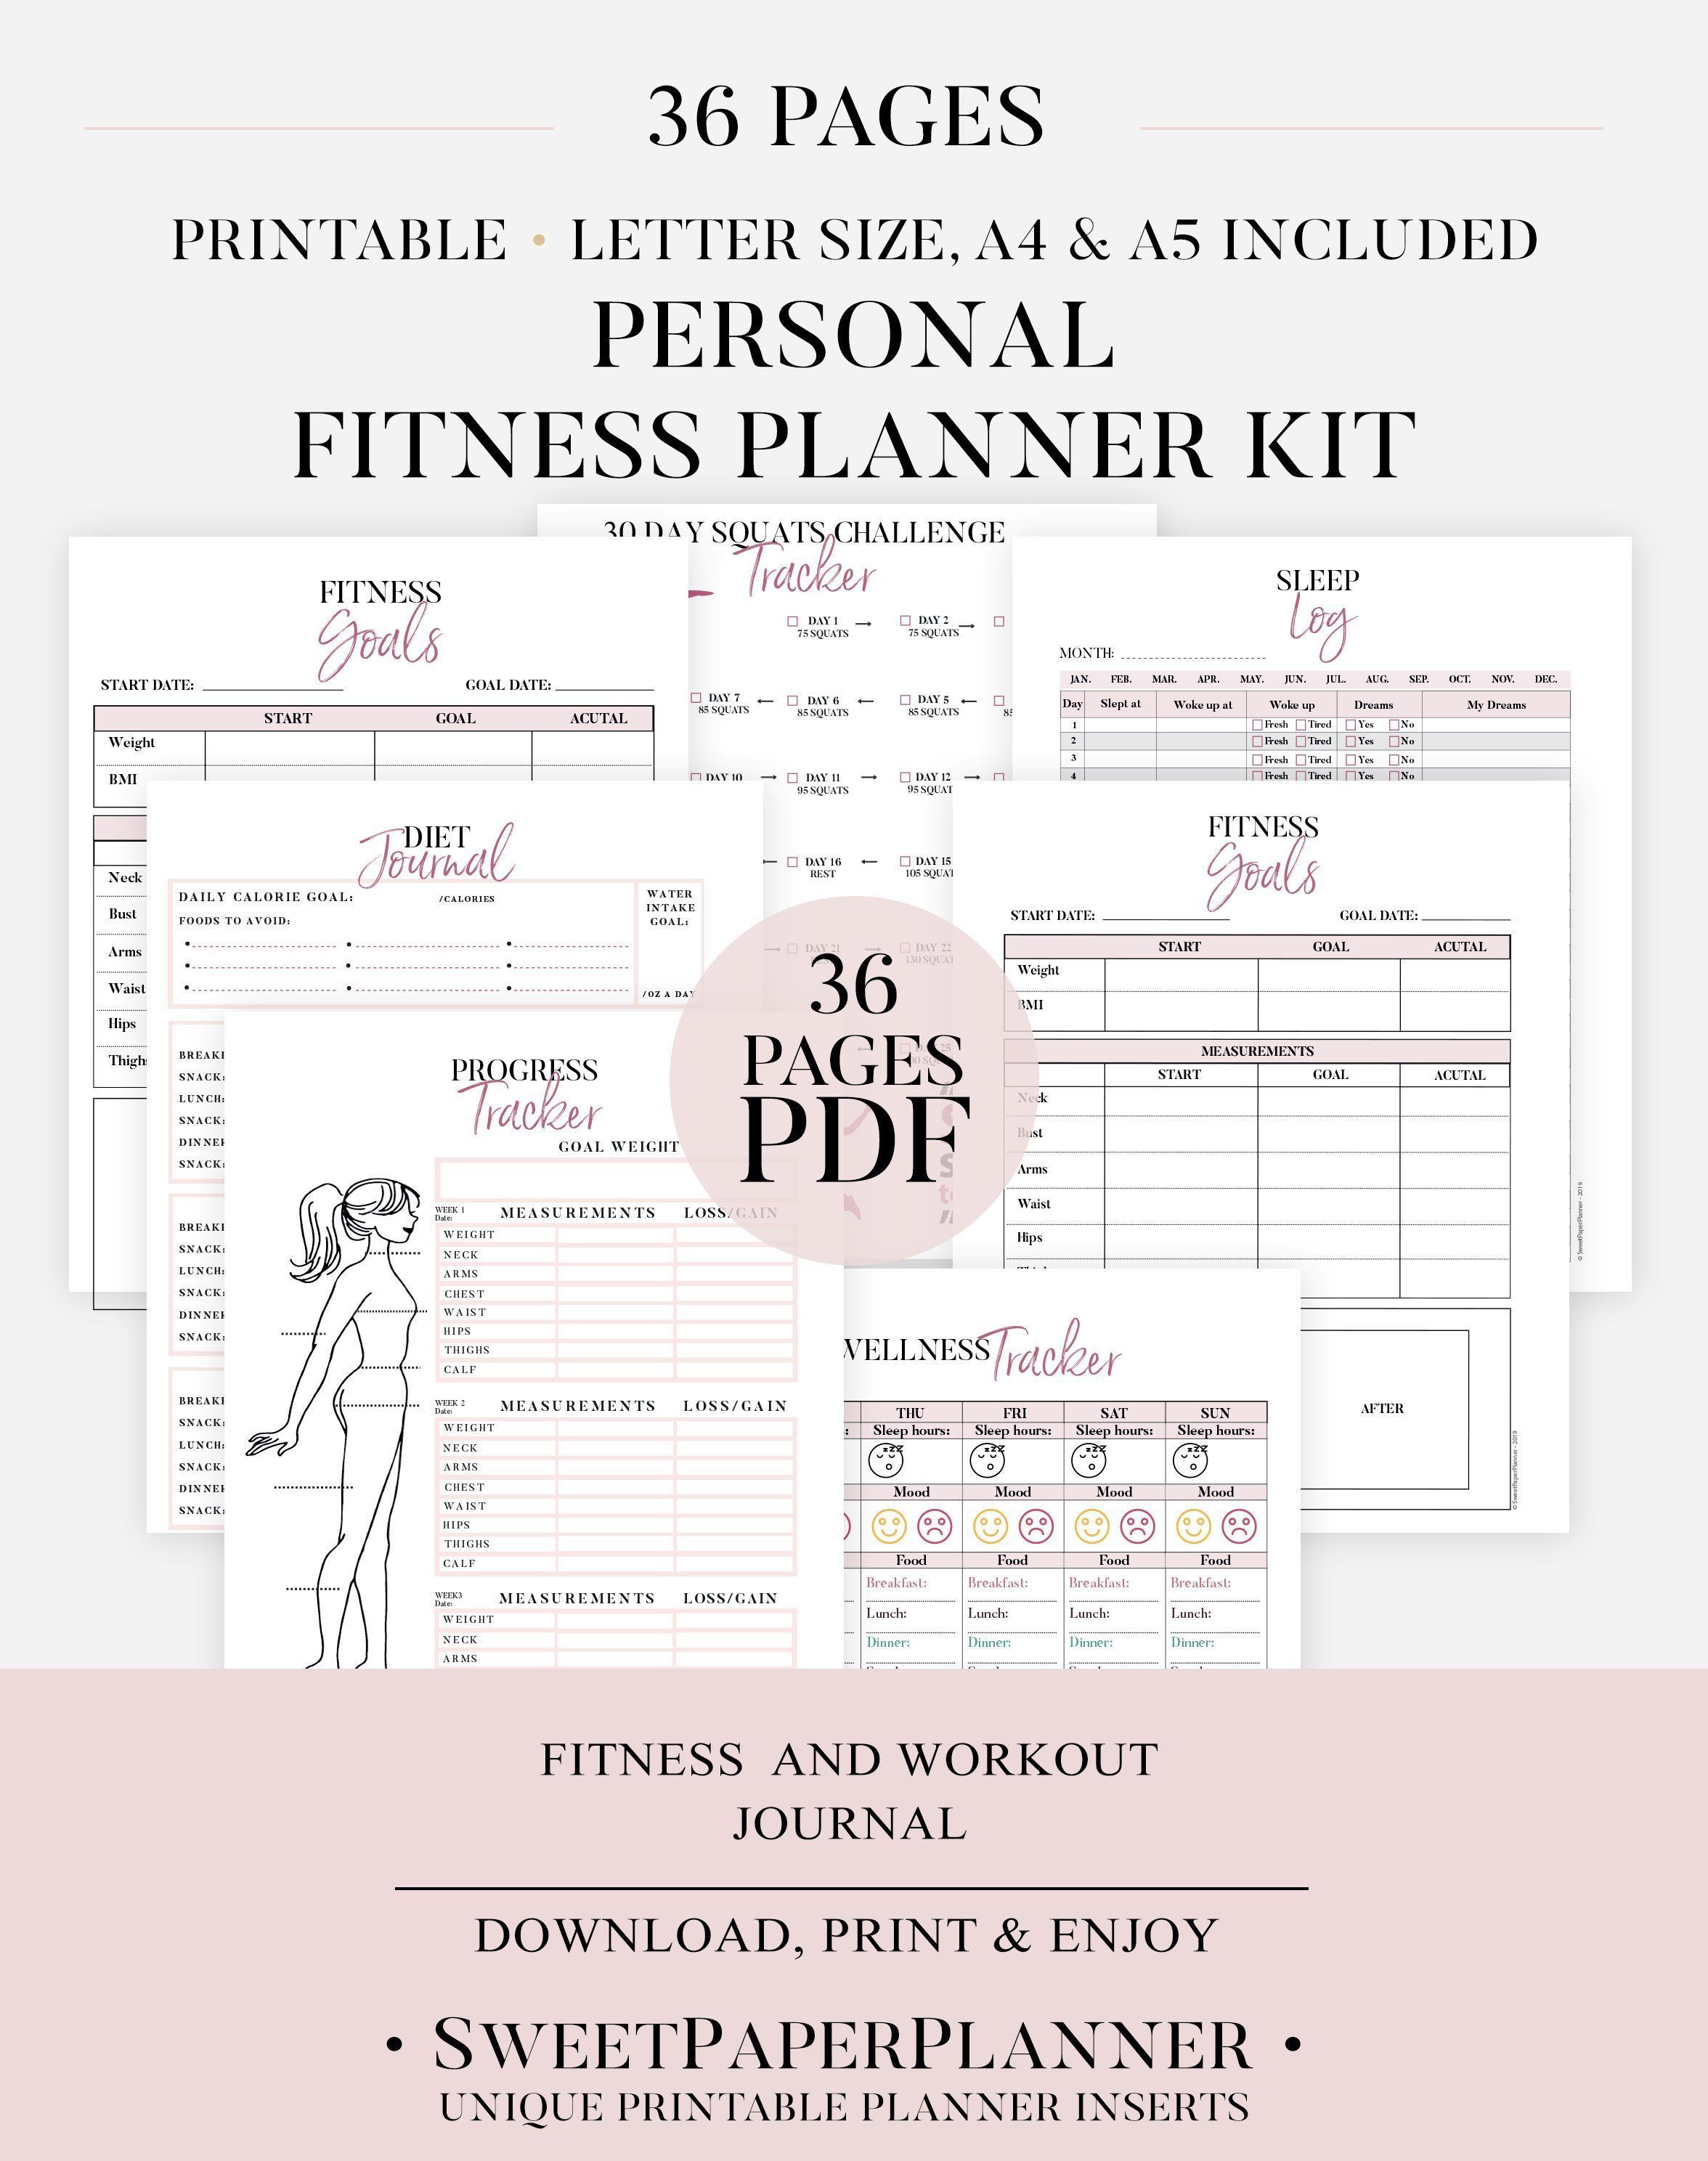 Ultimate Fitness Planner, Printable Health planner Bundle, Fitness Journal, Workout Log, Food And Exercise Tracker, 30 Day Squats Challenge - Ultimate Fitness Planner, Printable Health planner Bundle, Fitness Journal, Workout Log, Food And Exercise Tracker, 30 Day Squats Challenge -   16 fitness Journal digital ideas